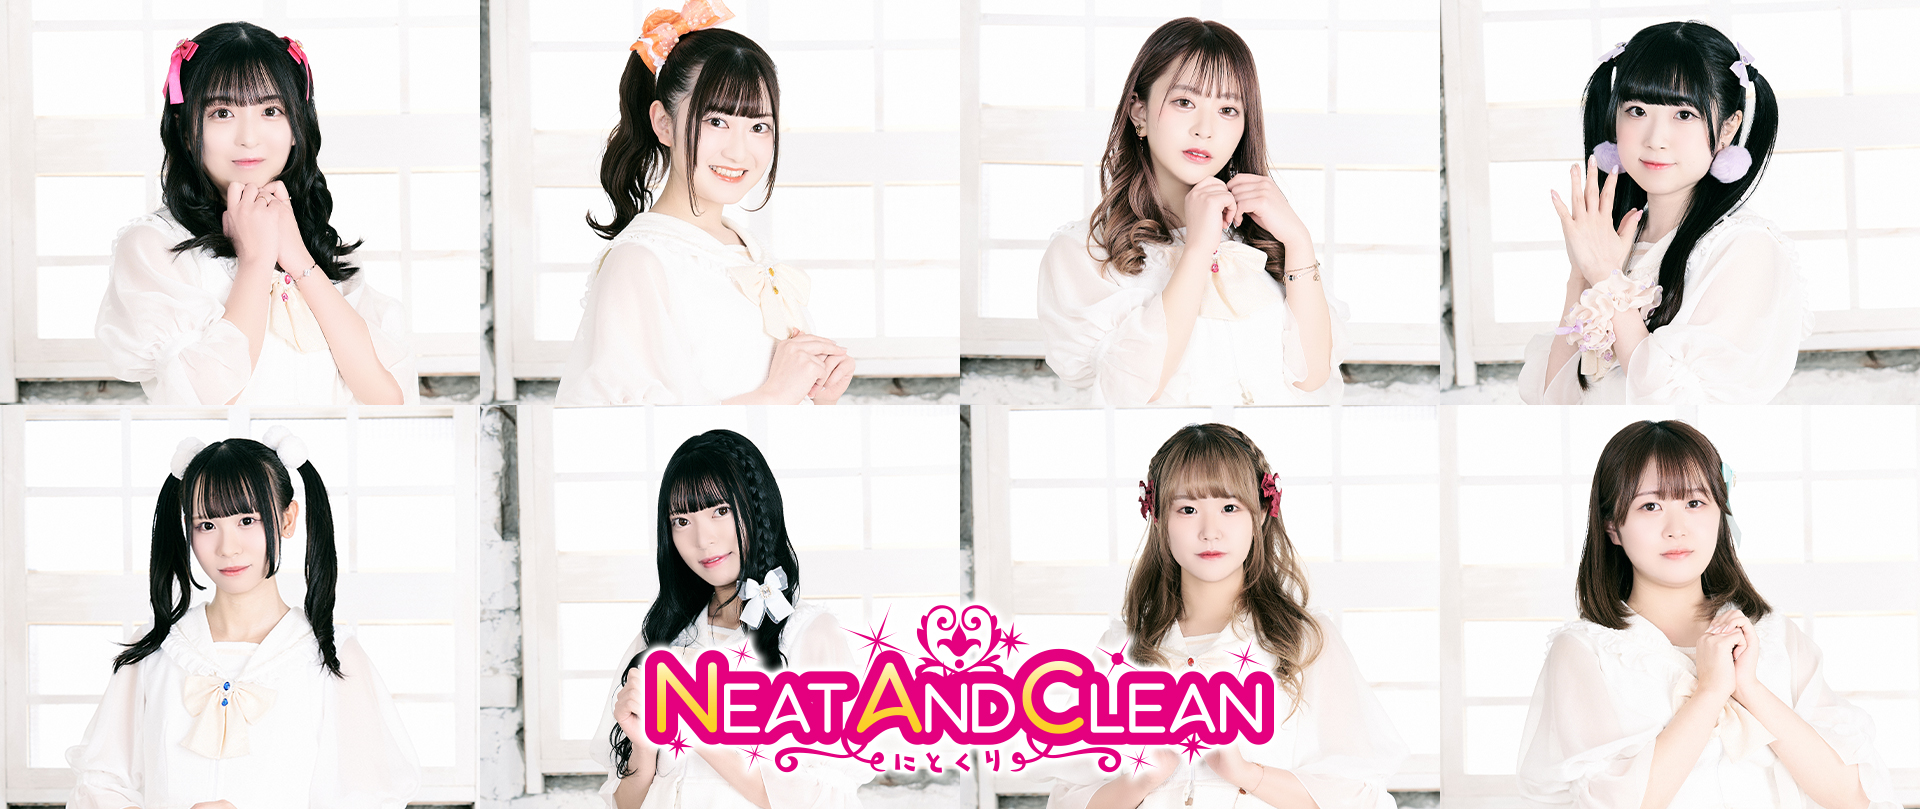 Neat and clean-ニトクリ-